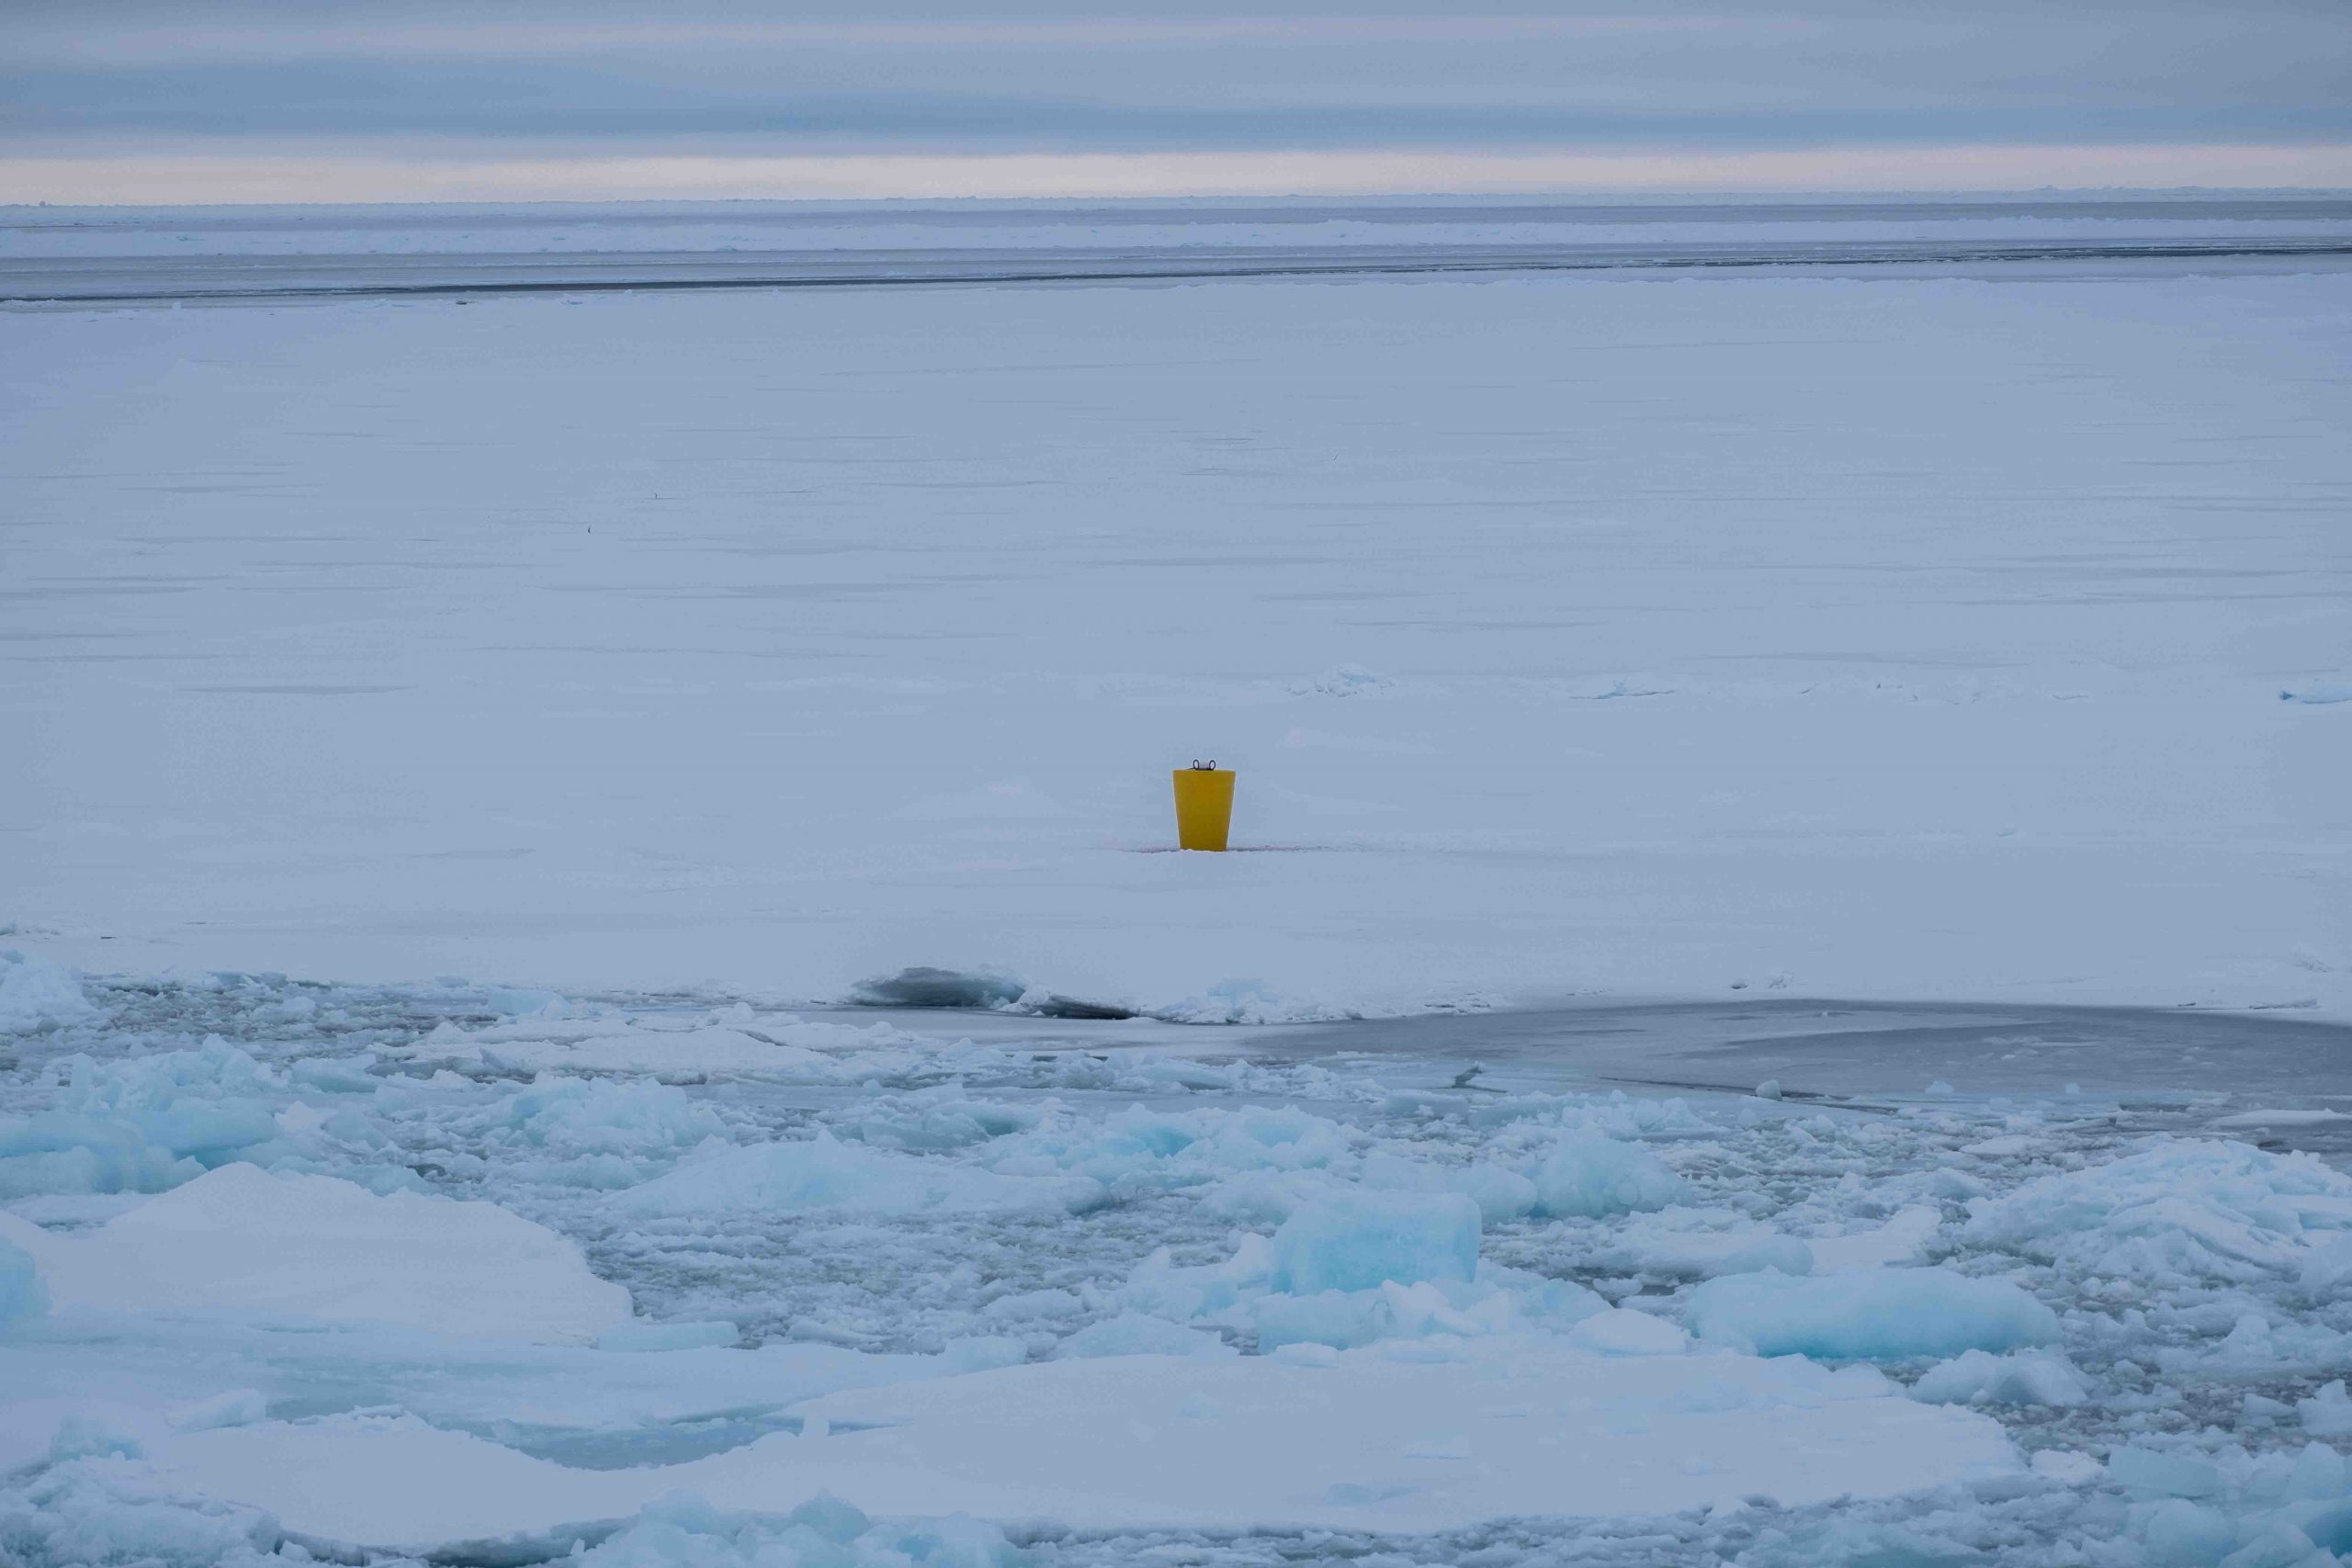 The first ITP deployed during this expedition. The yellow buoy houses a surface package with a satellite link to relay the data to shore. The sensors are suspended below the buoy into the ocean below. (Photo by Elizabeth Bailey).